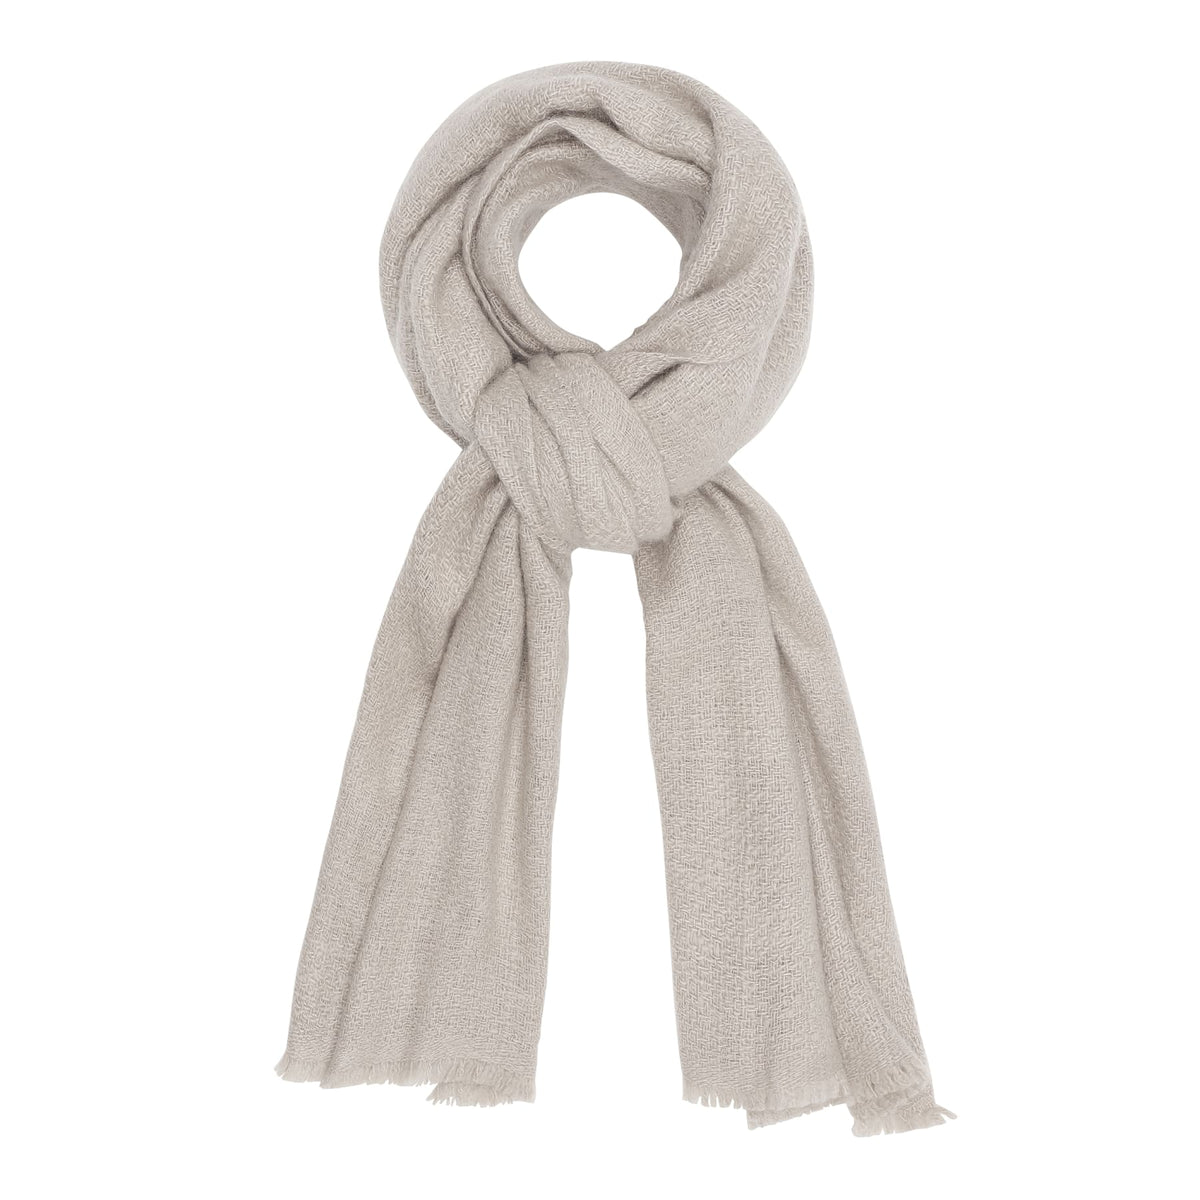 CARE BY ME 100% Cashmere Womens Spun Scarf